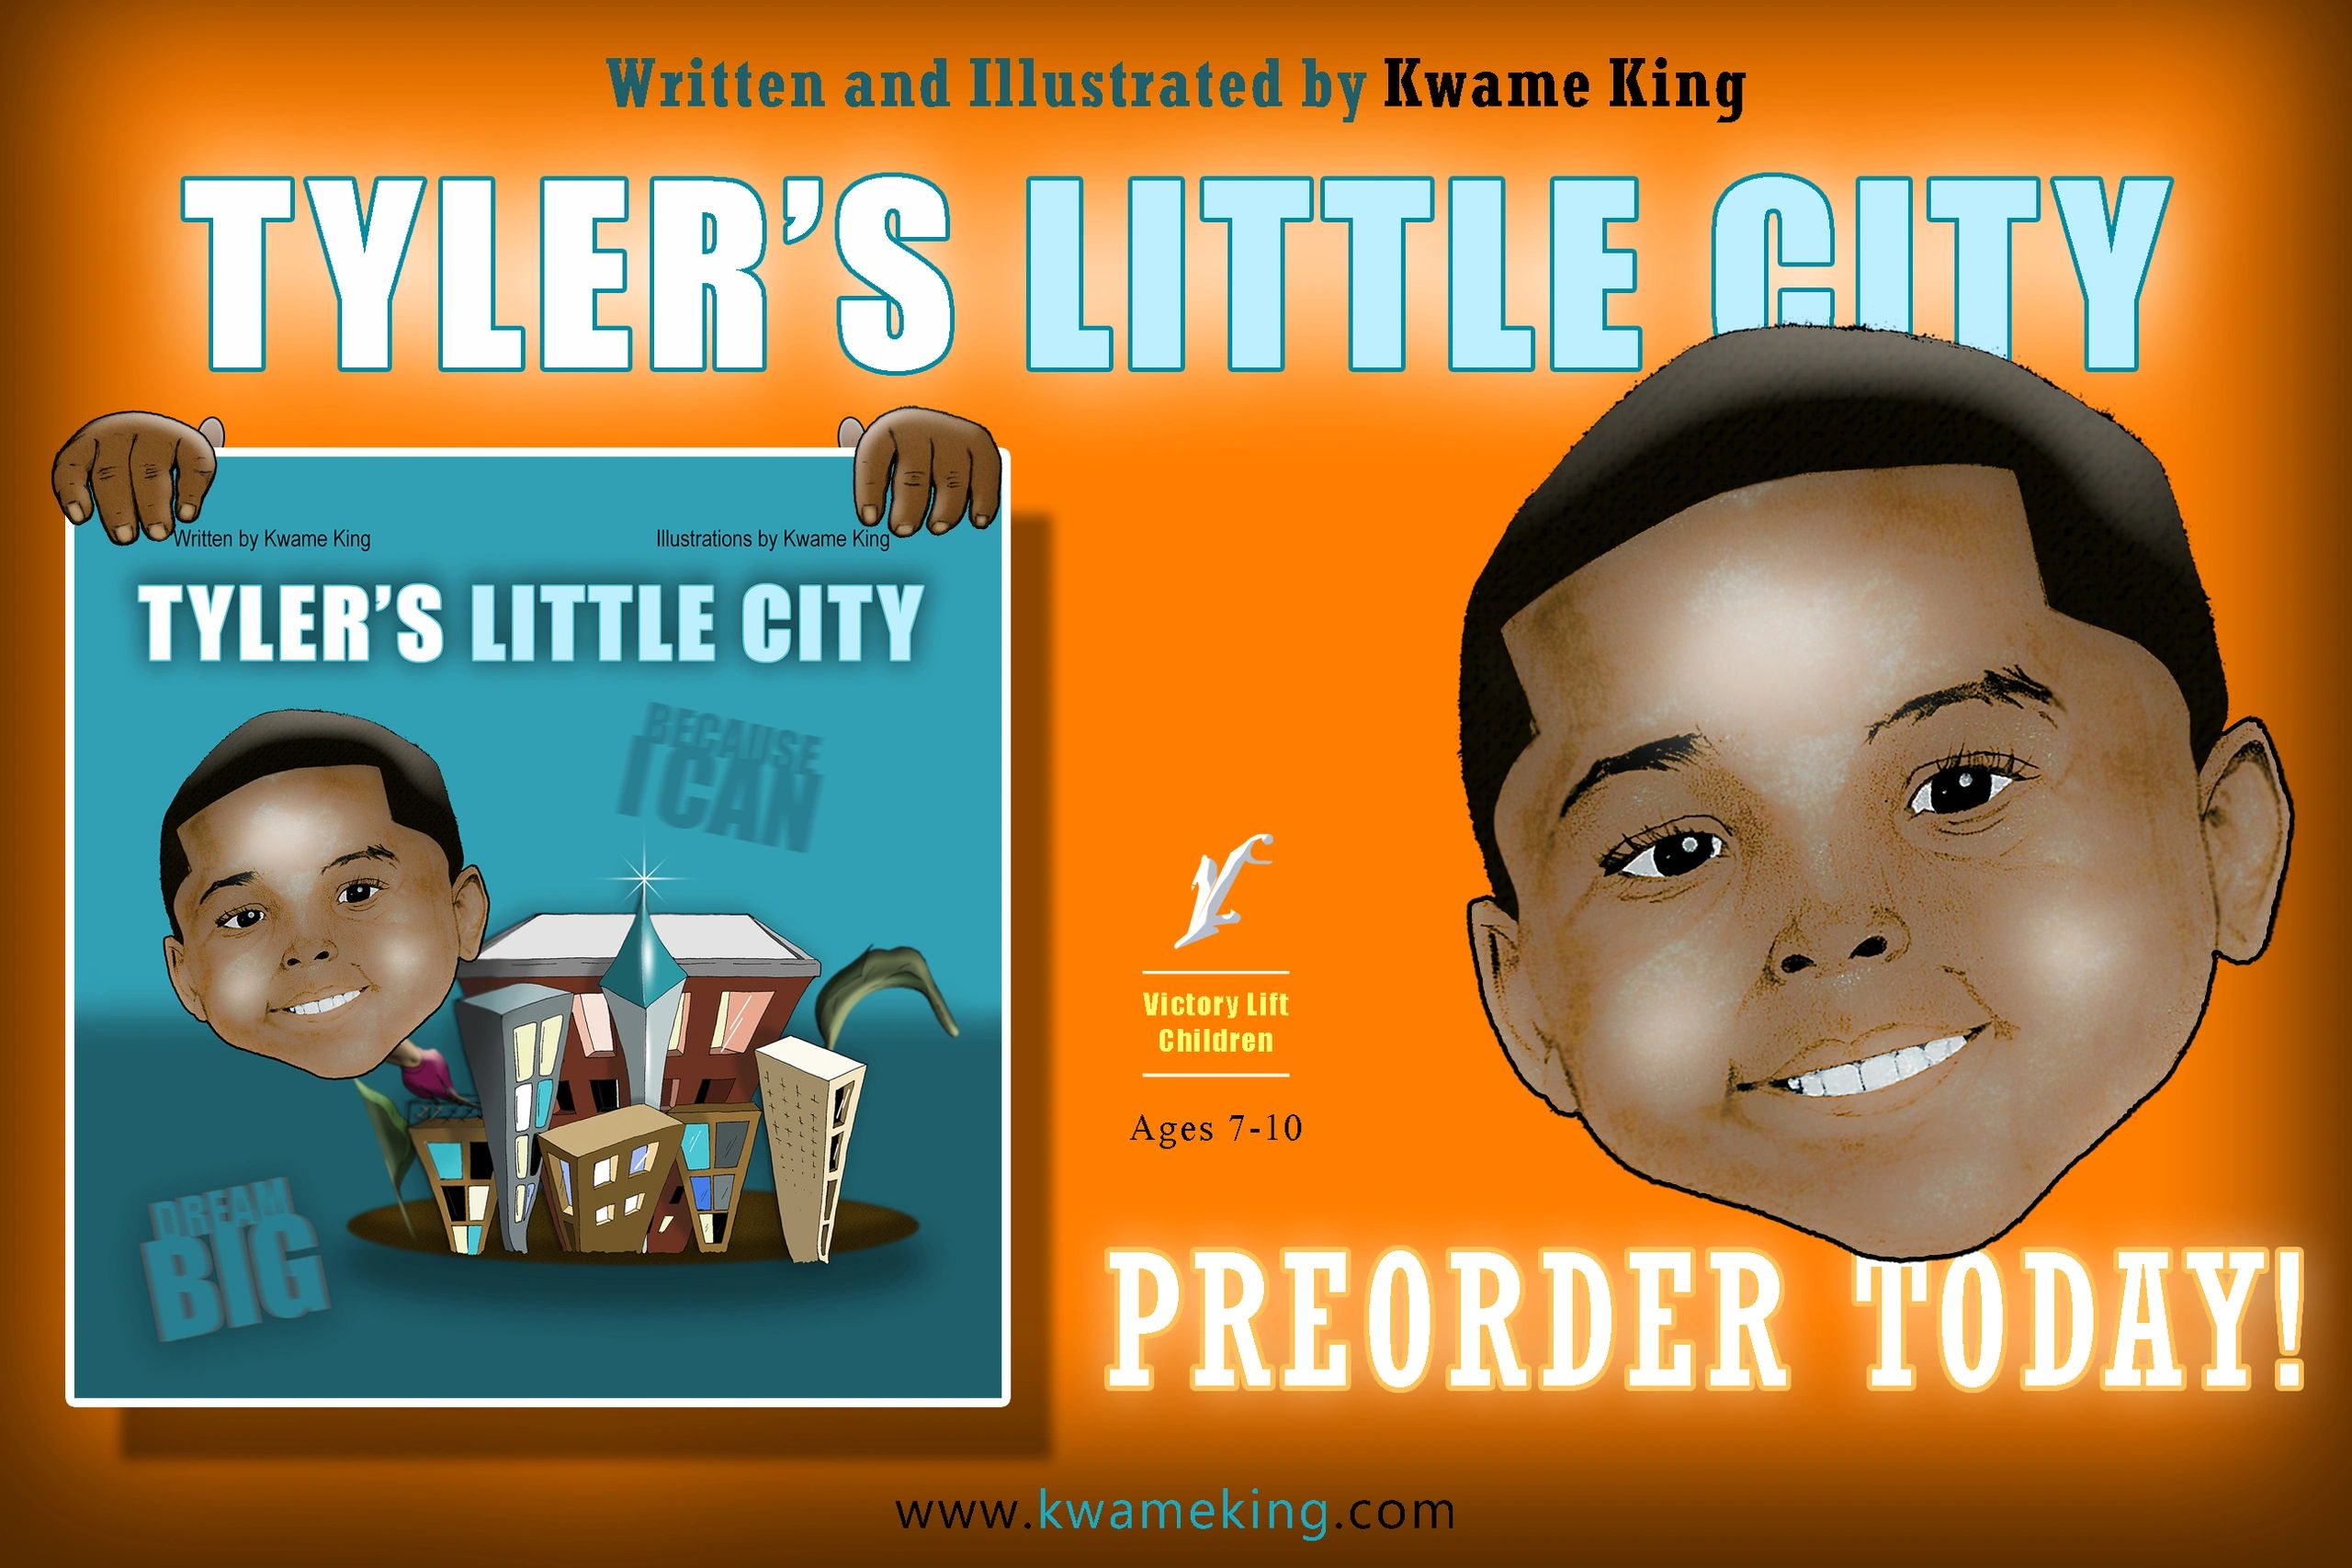 Tyler's Little City by Kwame King. Preorder Today!